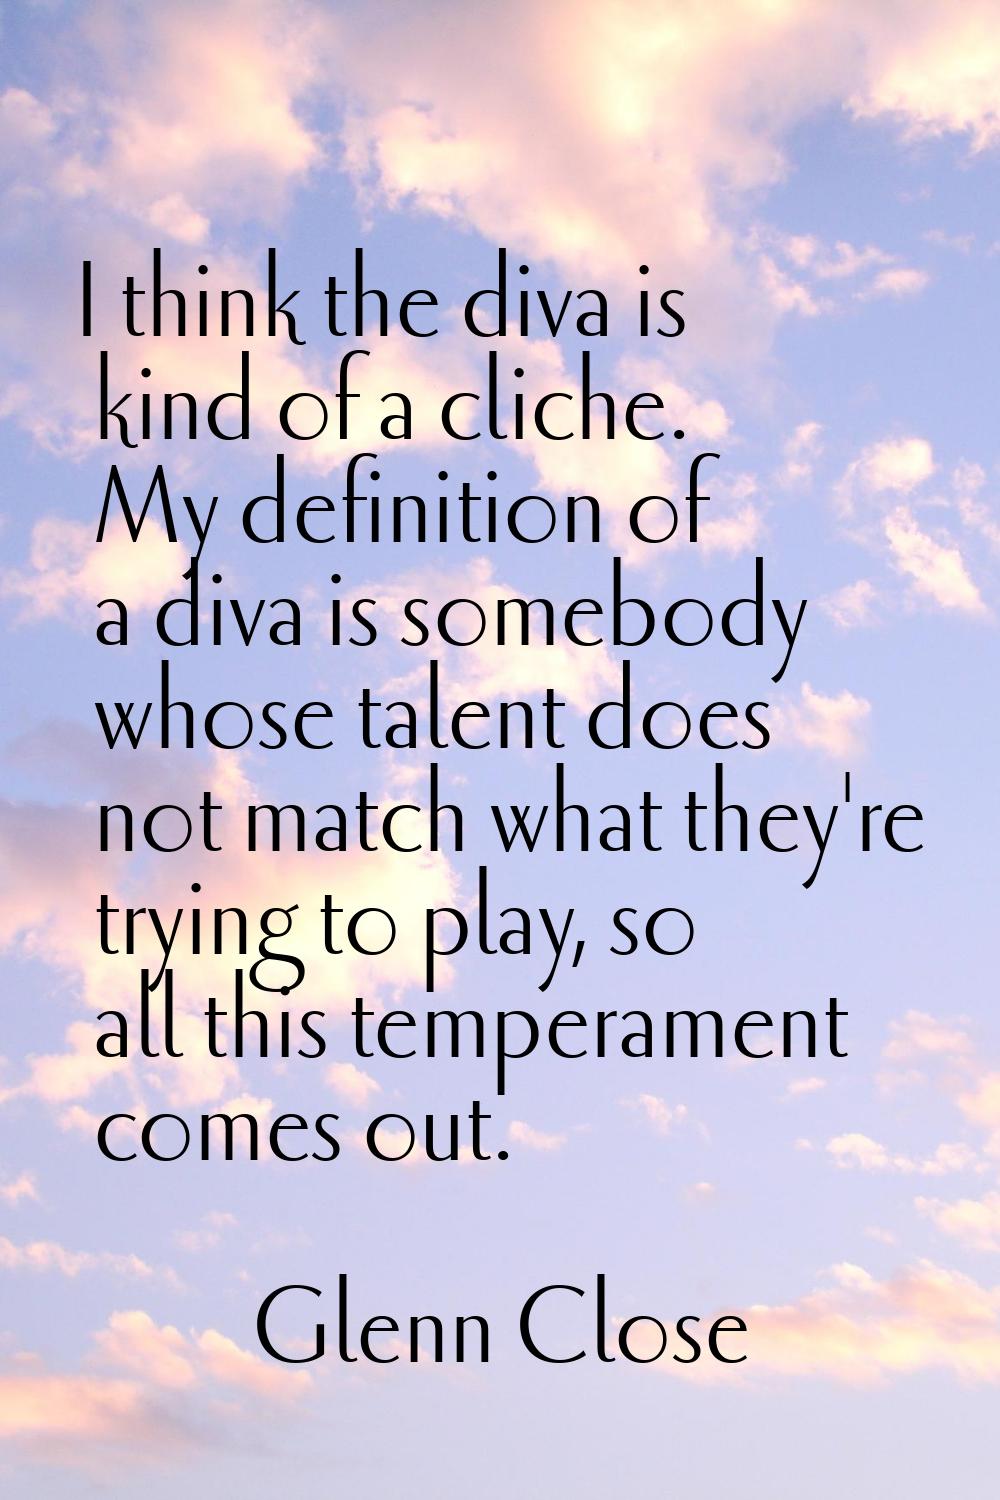 I think the diva is kind of a cliche. My definition of a diva is somebody whose talent does not mat